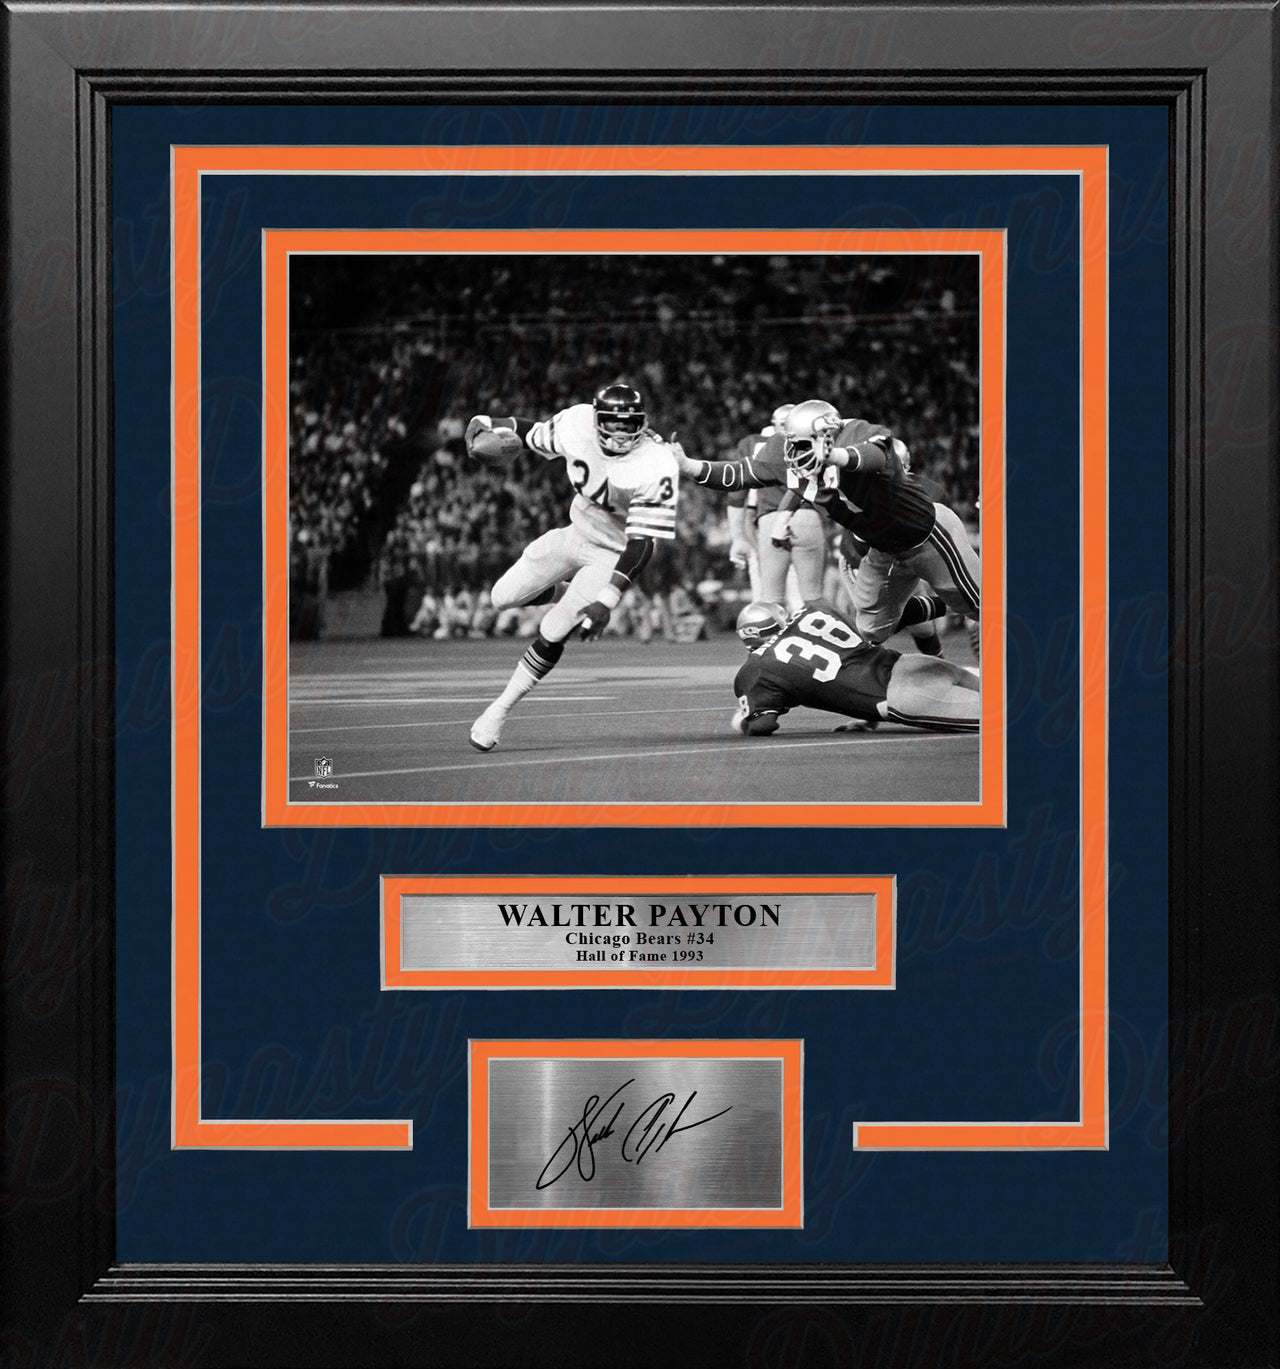 Walter Payton Black & White Action Chicago Bears 8" x 10" Framed Football Photo with Engraved Autograph